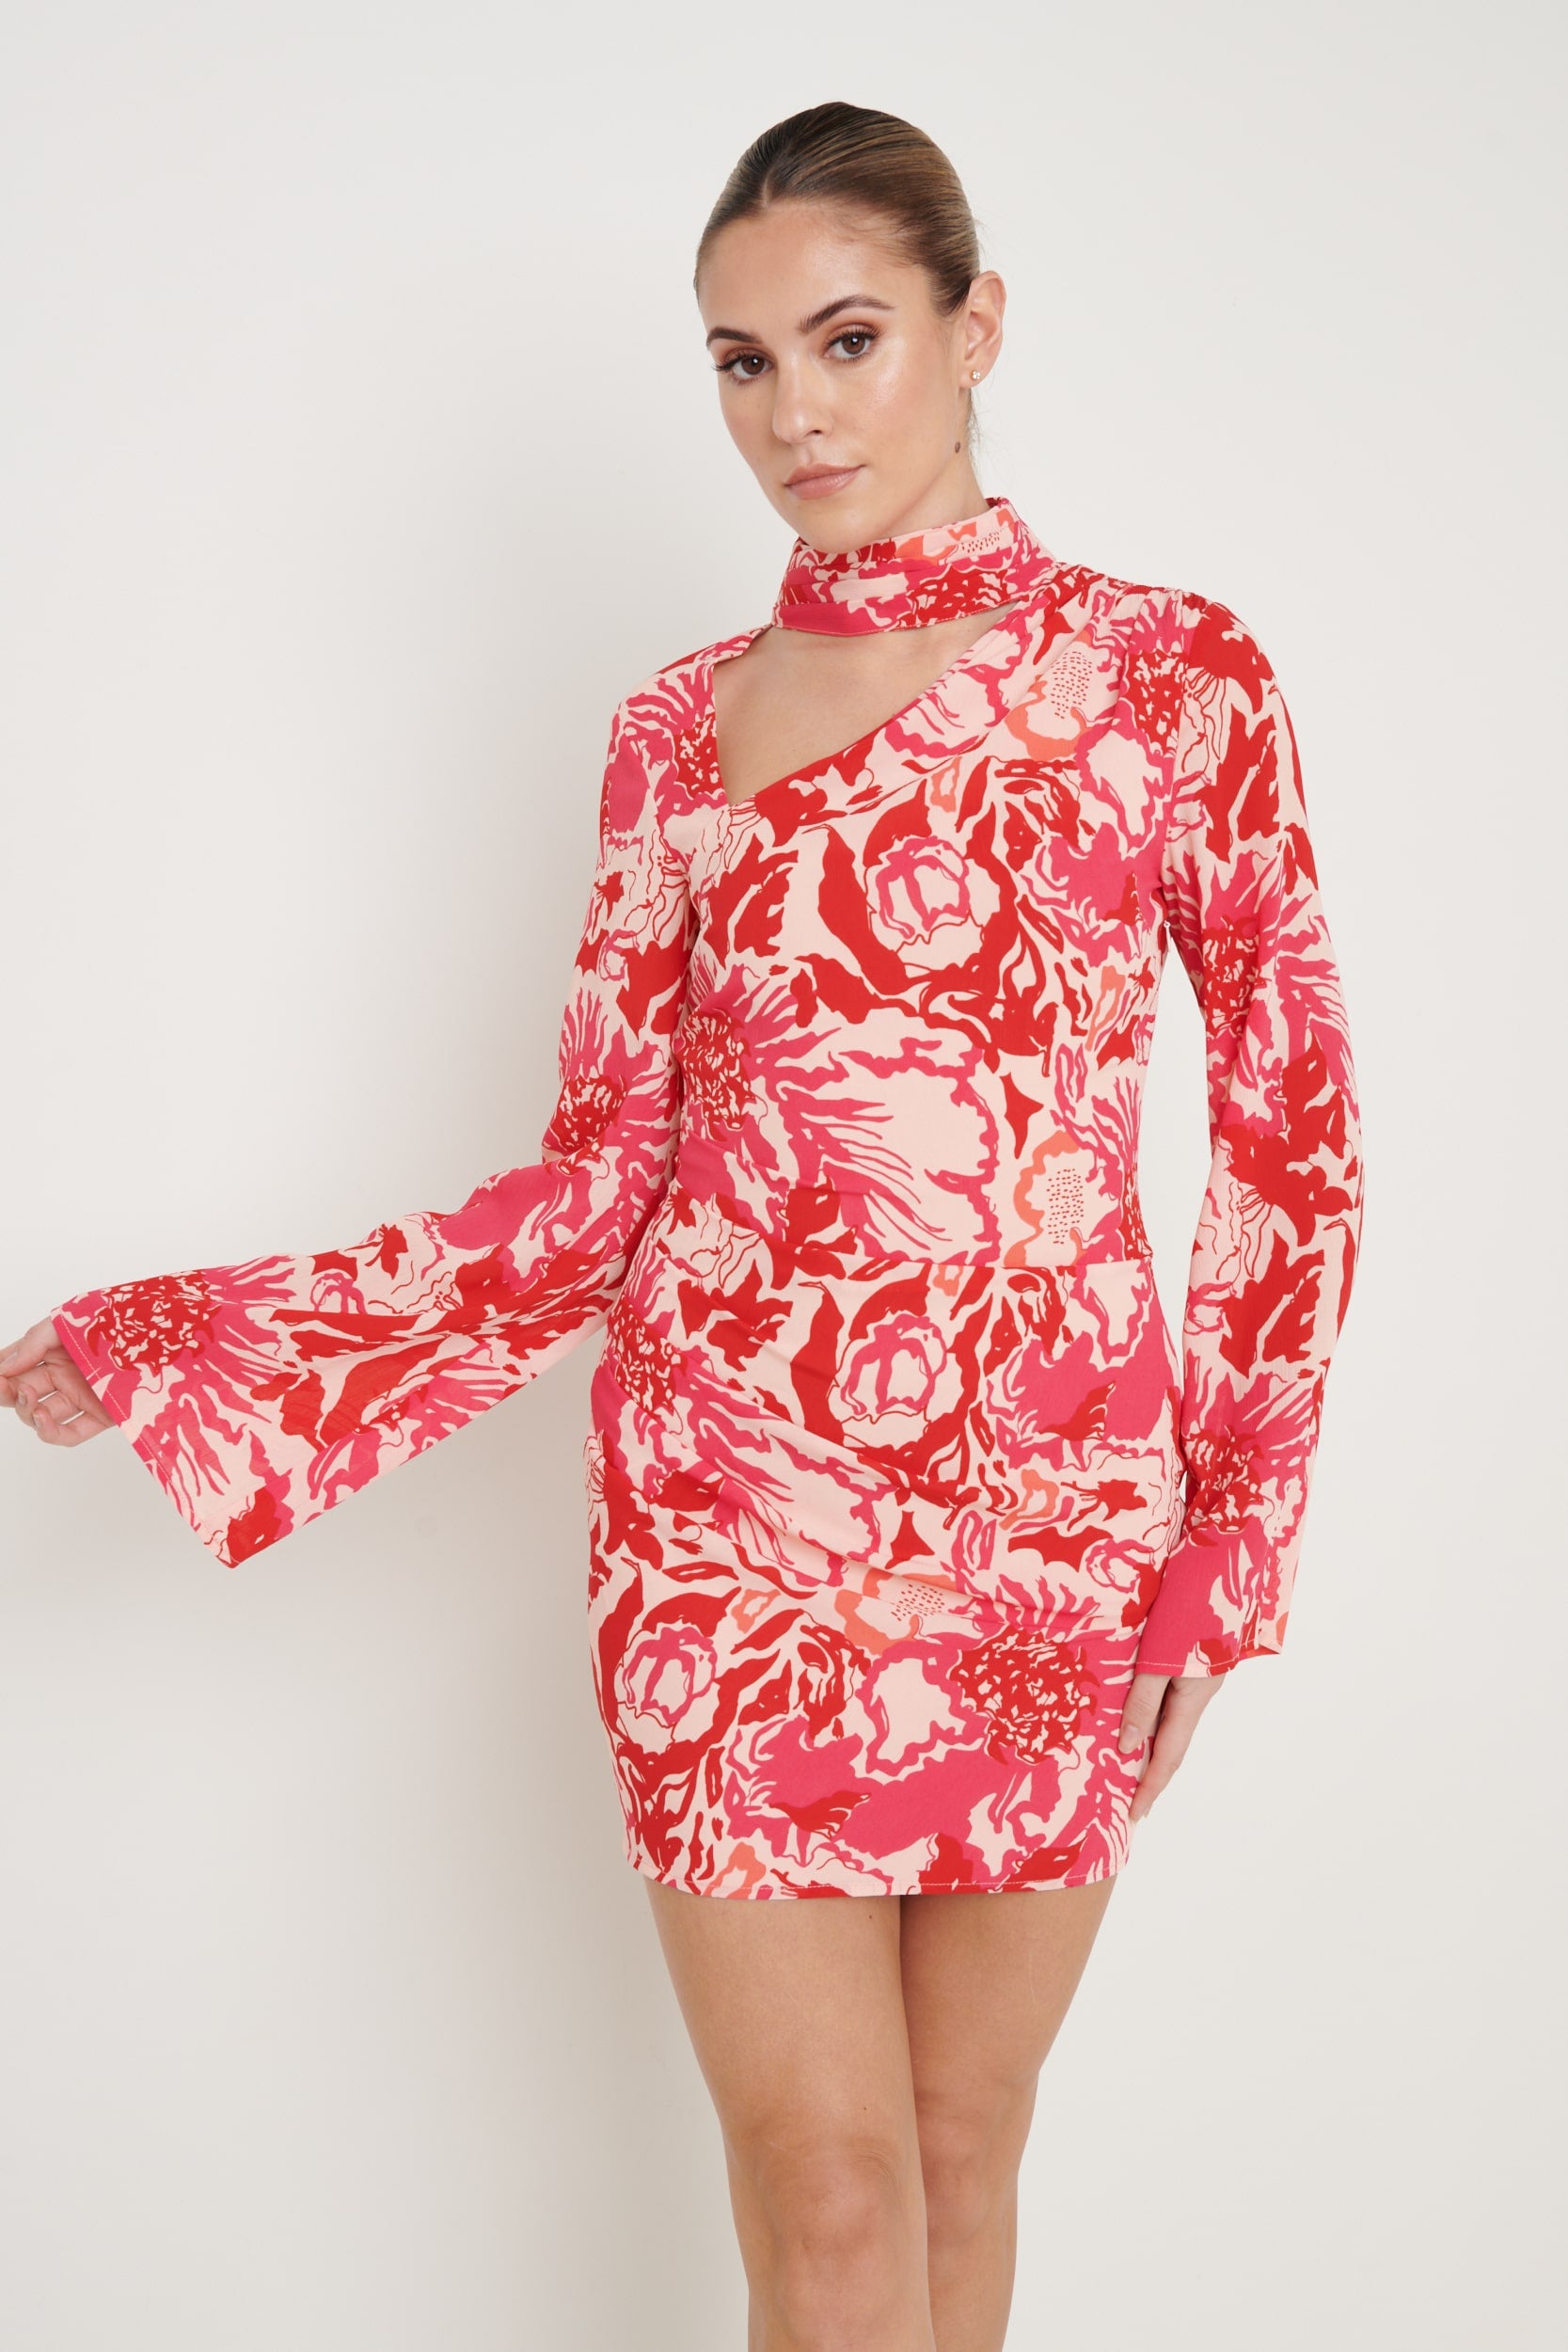 Athene Cut Out Mini Dress - Pink and Red Floral